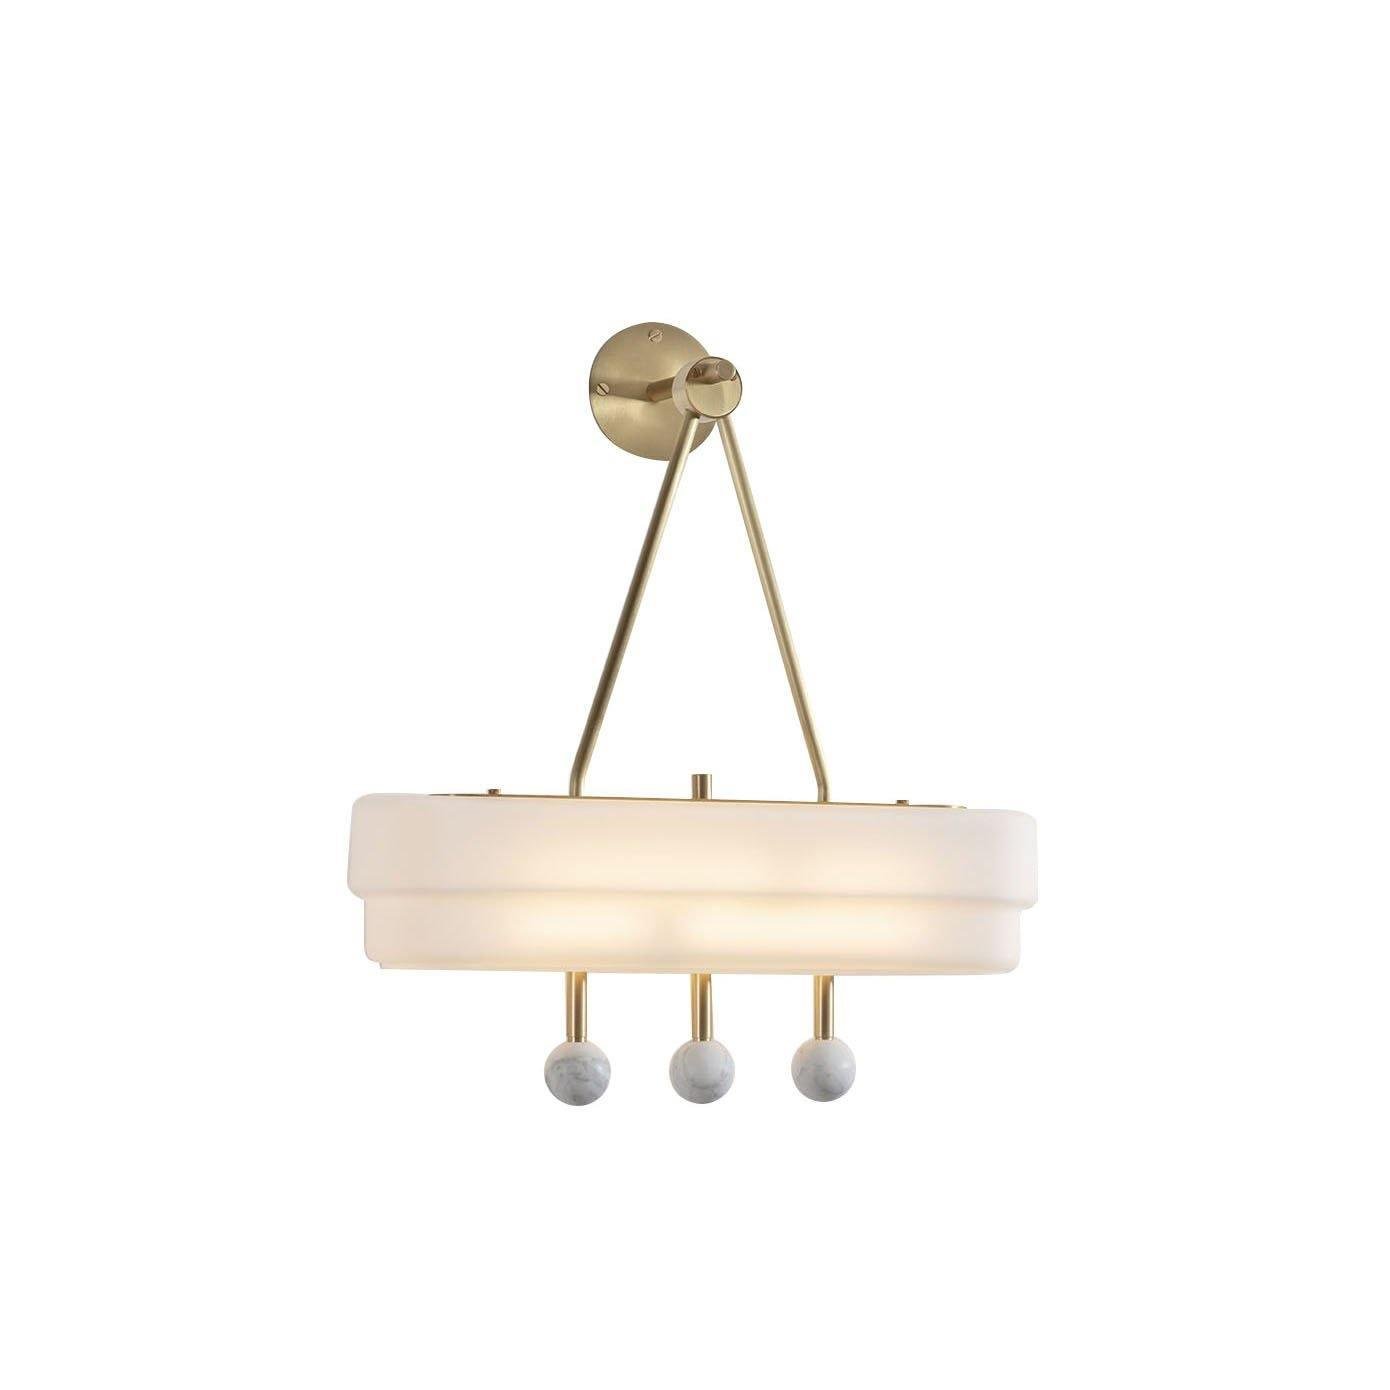 Spate Wall Light in Brushed Brass and Glass with White Marble, Diameter 40cm x Height 40cm (2-Pack), Warm White Illumination